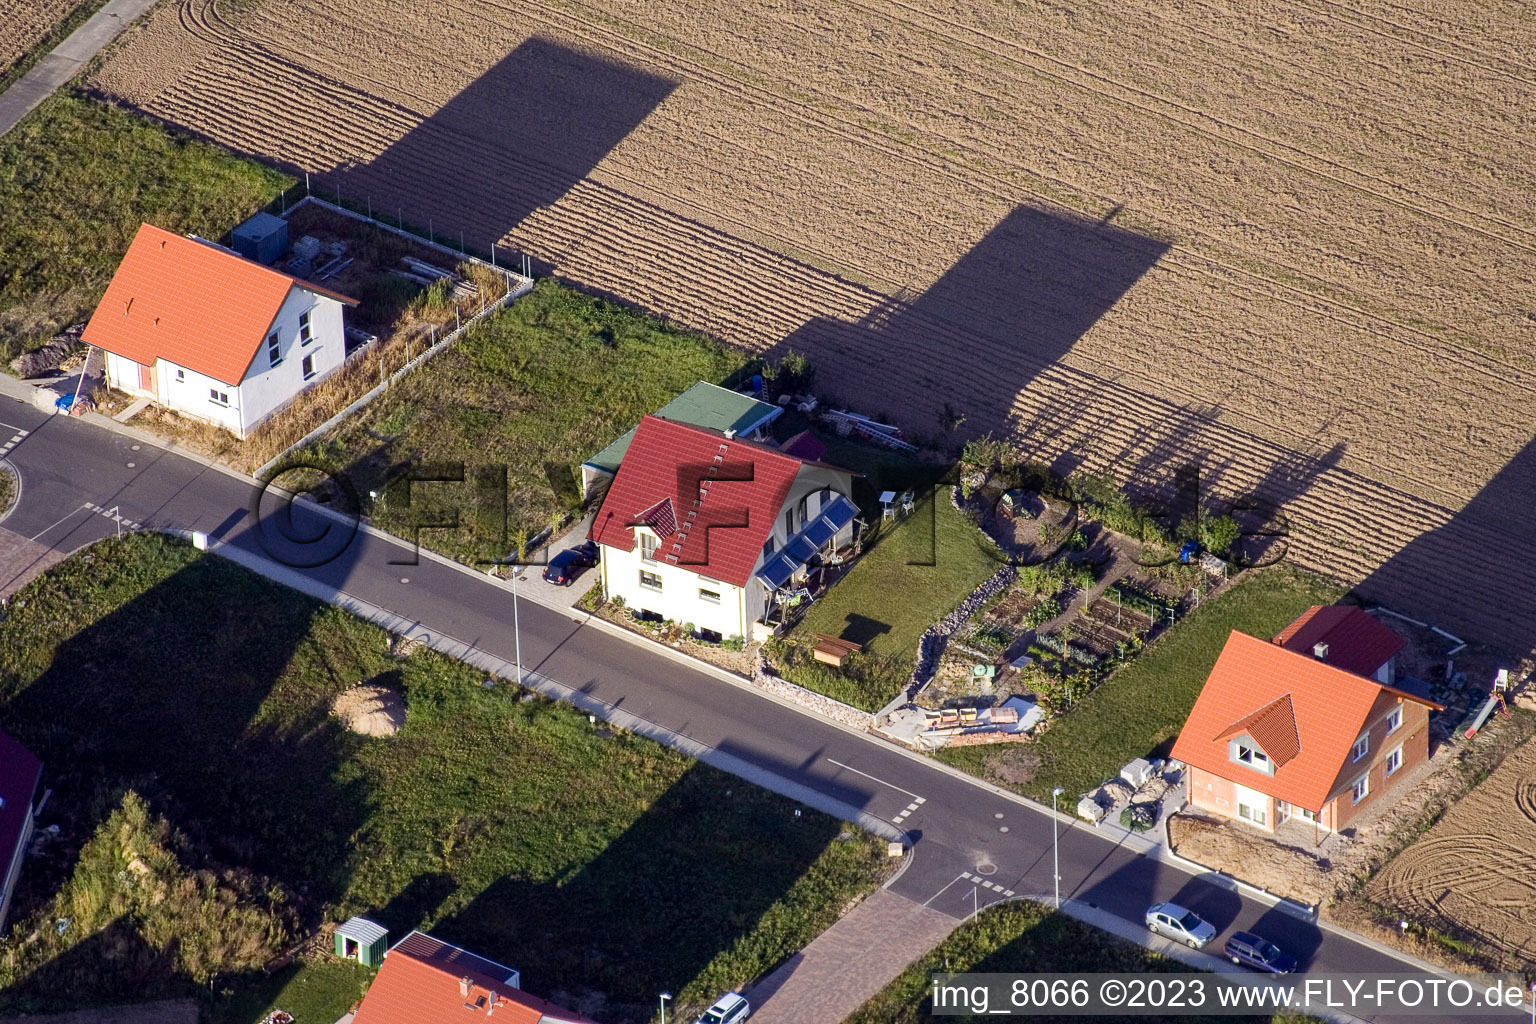 New development area in the district Schaidt in Wörth am Rhein in the state Rhineland-Palatinate, Germany from above